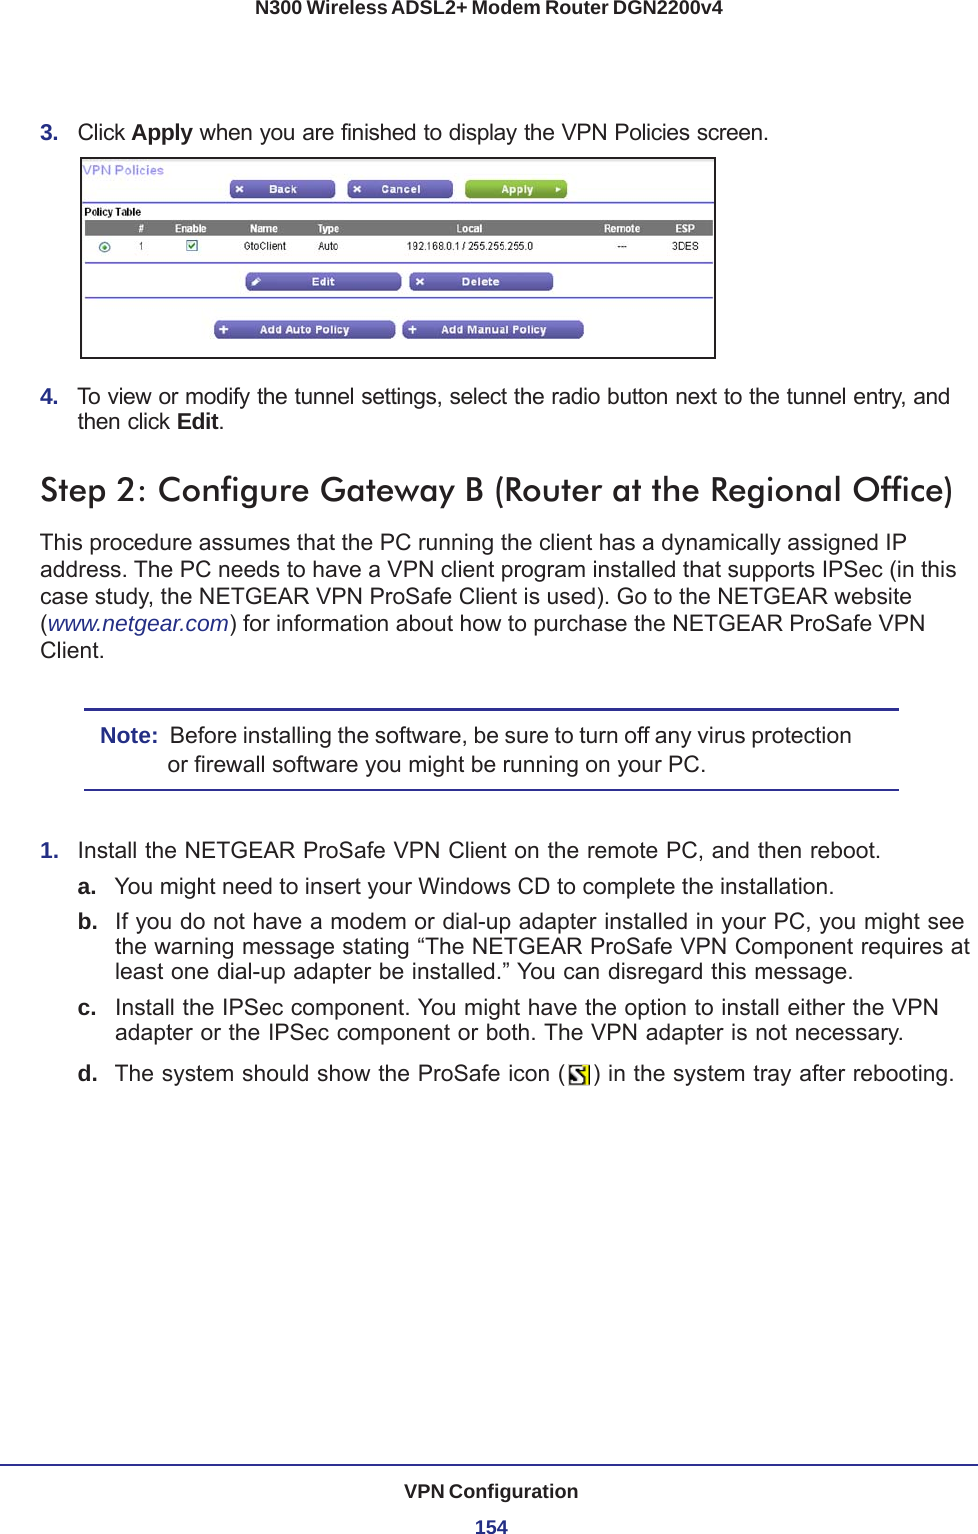 VPN Configuration154N300 Wireless ADSL2+ Modem Router DGN2200v43.  Click Apply when you are finished to display the VPN Policies screen.4.  To view or modify the tunnel settings, select the radio button next to the tunnel entry, and then click Edit. Step 2: Configure Gateway B (Router at the Regional Office)This procedure assumes that the PC running the client has a dynamically assigned IP address. The PC needs to have a VPN client program installed that supports IPSec (in this case study, the NETGEAR VPN ProSafe Client is used). Go to the NETGEAR website (www.netgear.com) for information about how to purchase the NETGEAR ProSafe VPN Client.Note:  Before installing the software, be sure to turn off any virus protection or firewall software you might be running on your PC.1.  Install the NETGEAR ProSafe VPN Client on the remote PC, and then reboot.a. You might need to insert your Windows CD to complete the installation.b.  If you do not have a modem or dial-up adapter installed in your PC, you might see the warning message stating “The NETGEAR ProSafe VPN Component requires at least one dial-up adapter be installed.” You can disregard this message.c.  Install the IPSec component. You might have the option to install either the VPN adapter or the IPSec component or both. The VPN adapter is not necessary.d.  The system should show the ProSafe icon ( ) in the system tray after rebooting.